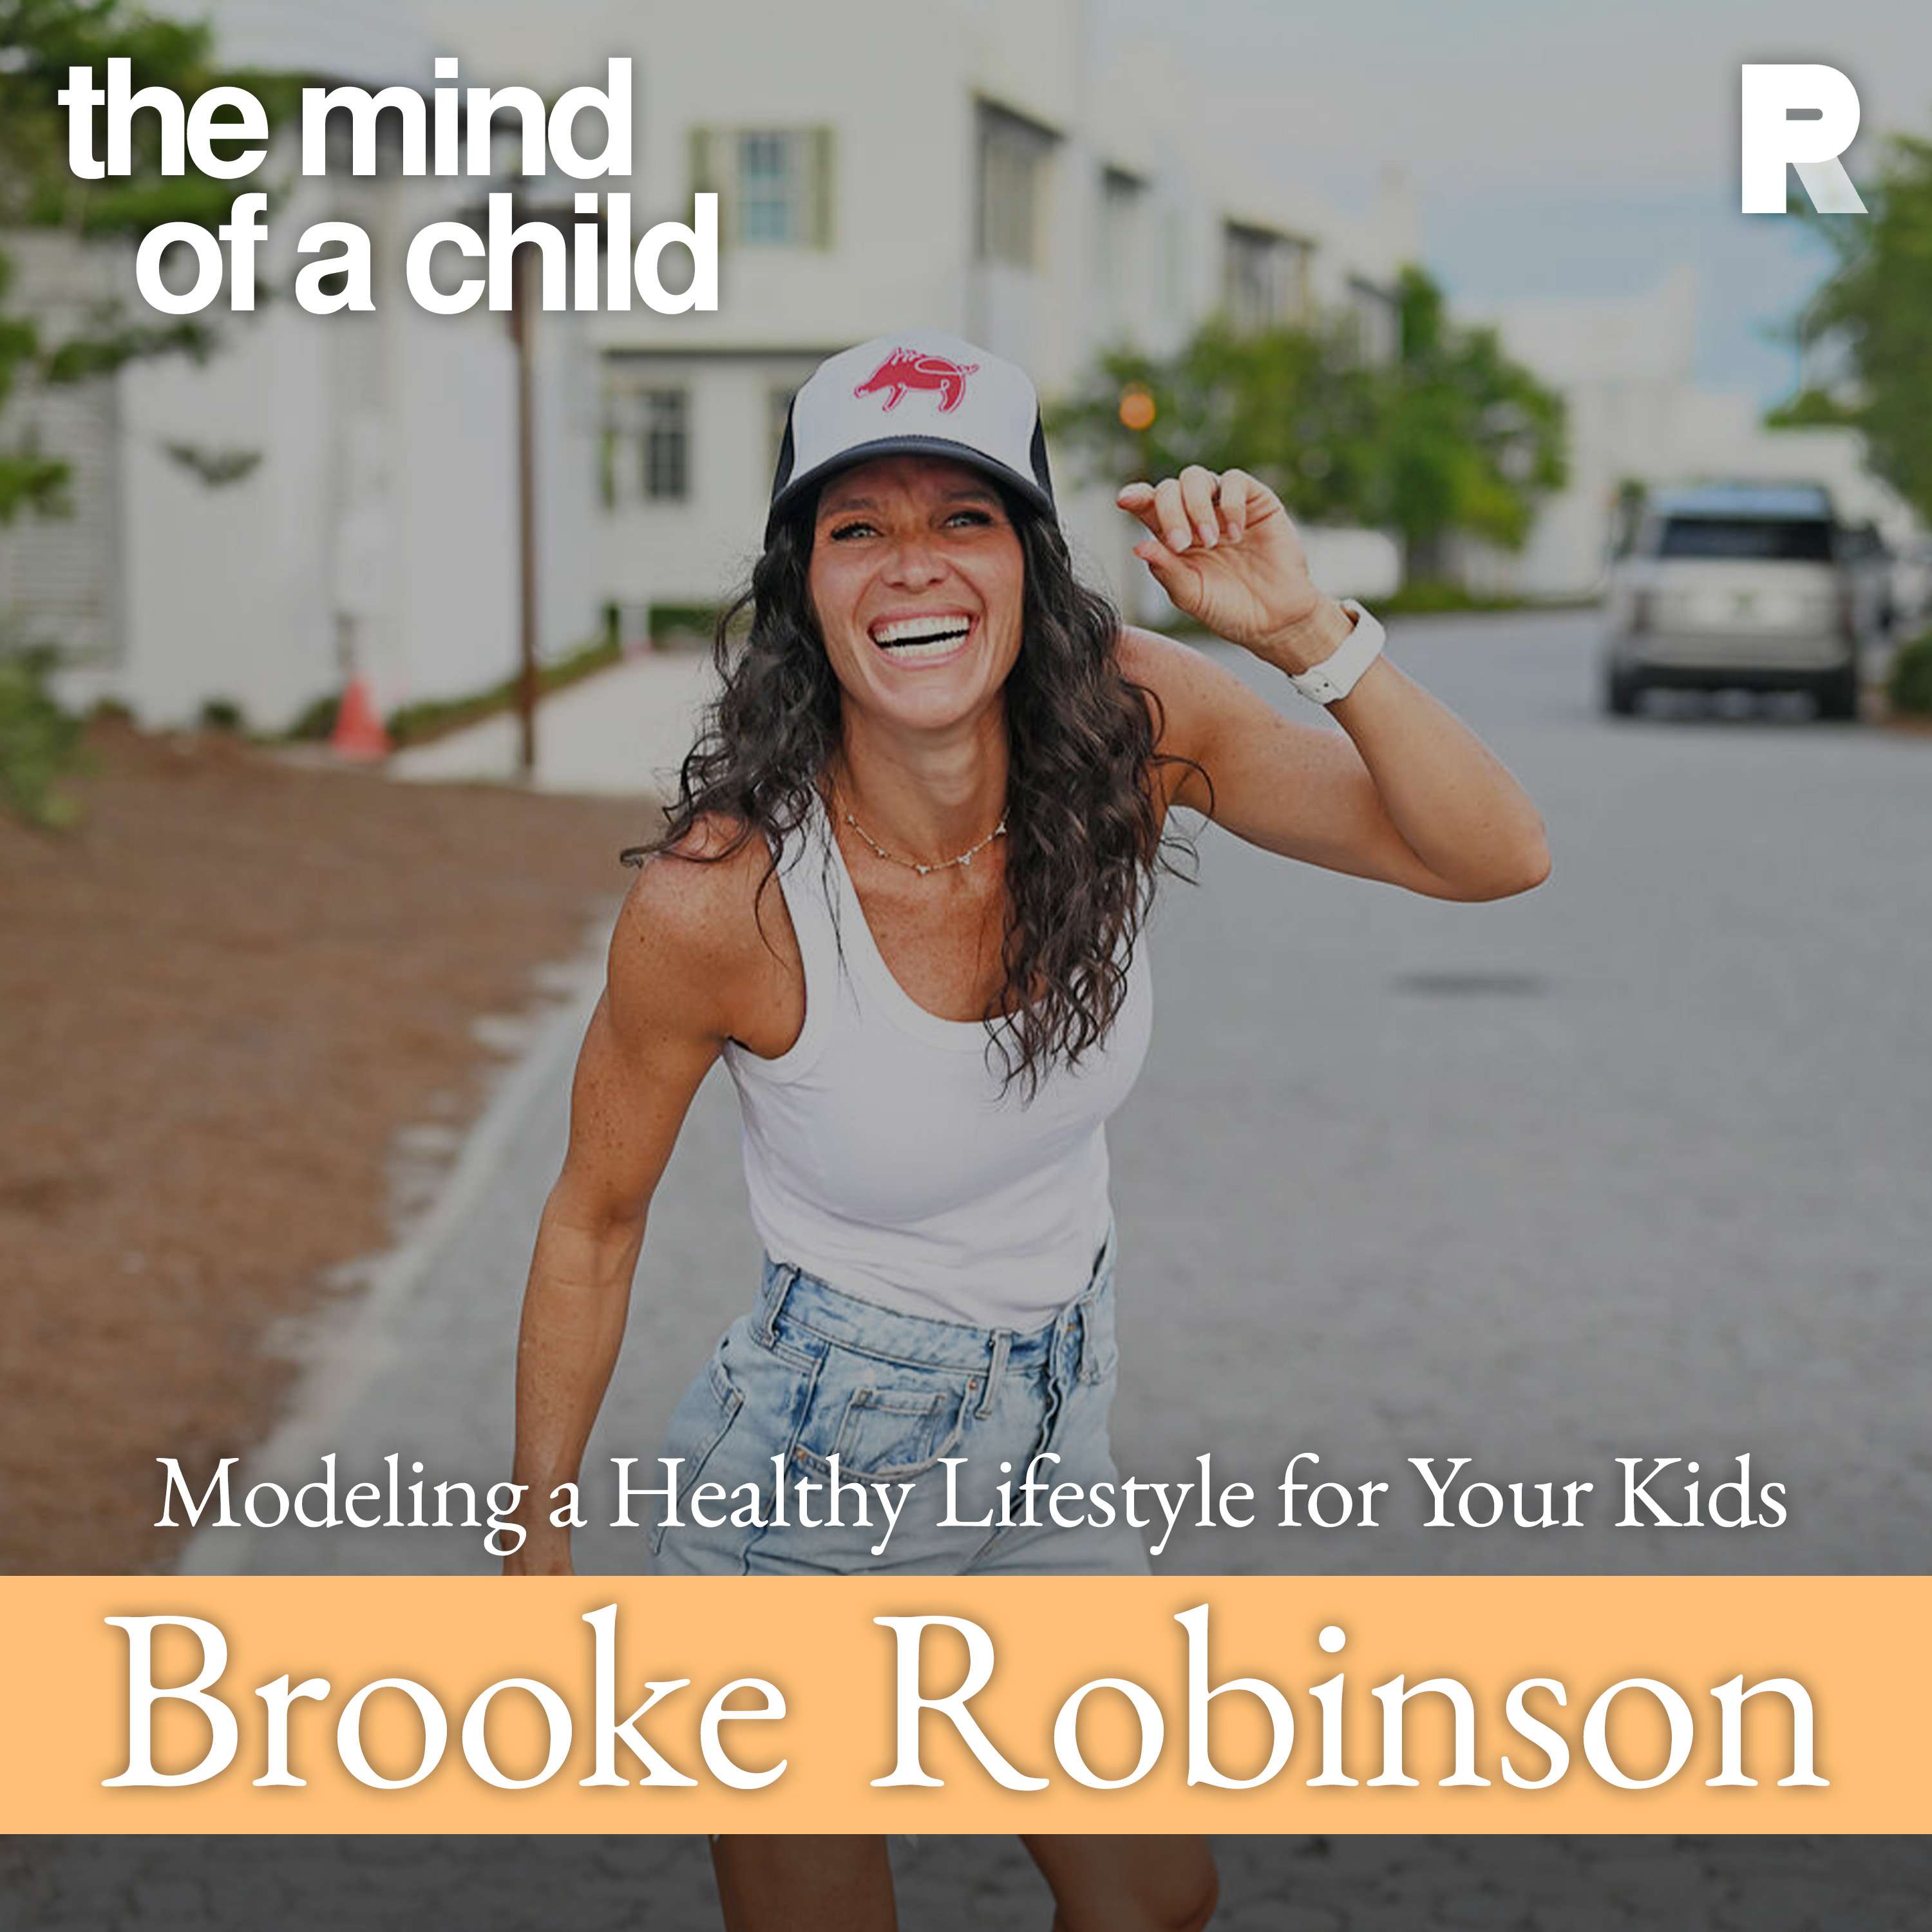 Debunking Fitness Lies and Modeling a Healthy Lifestyle for Your Kids with Brooke Robinson Fit